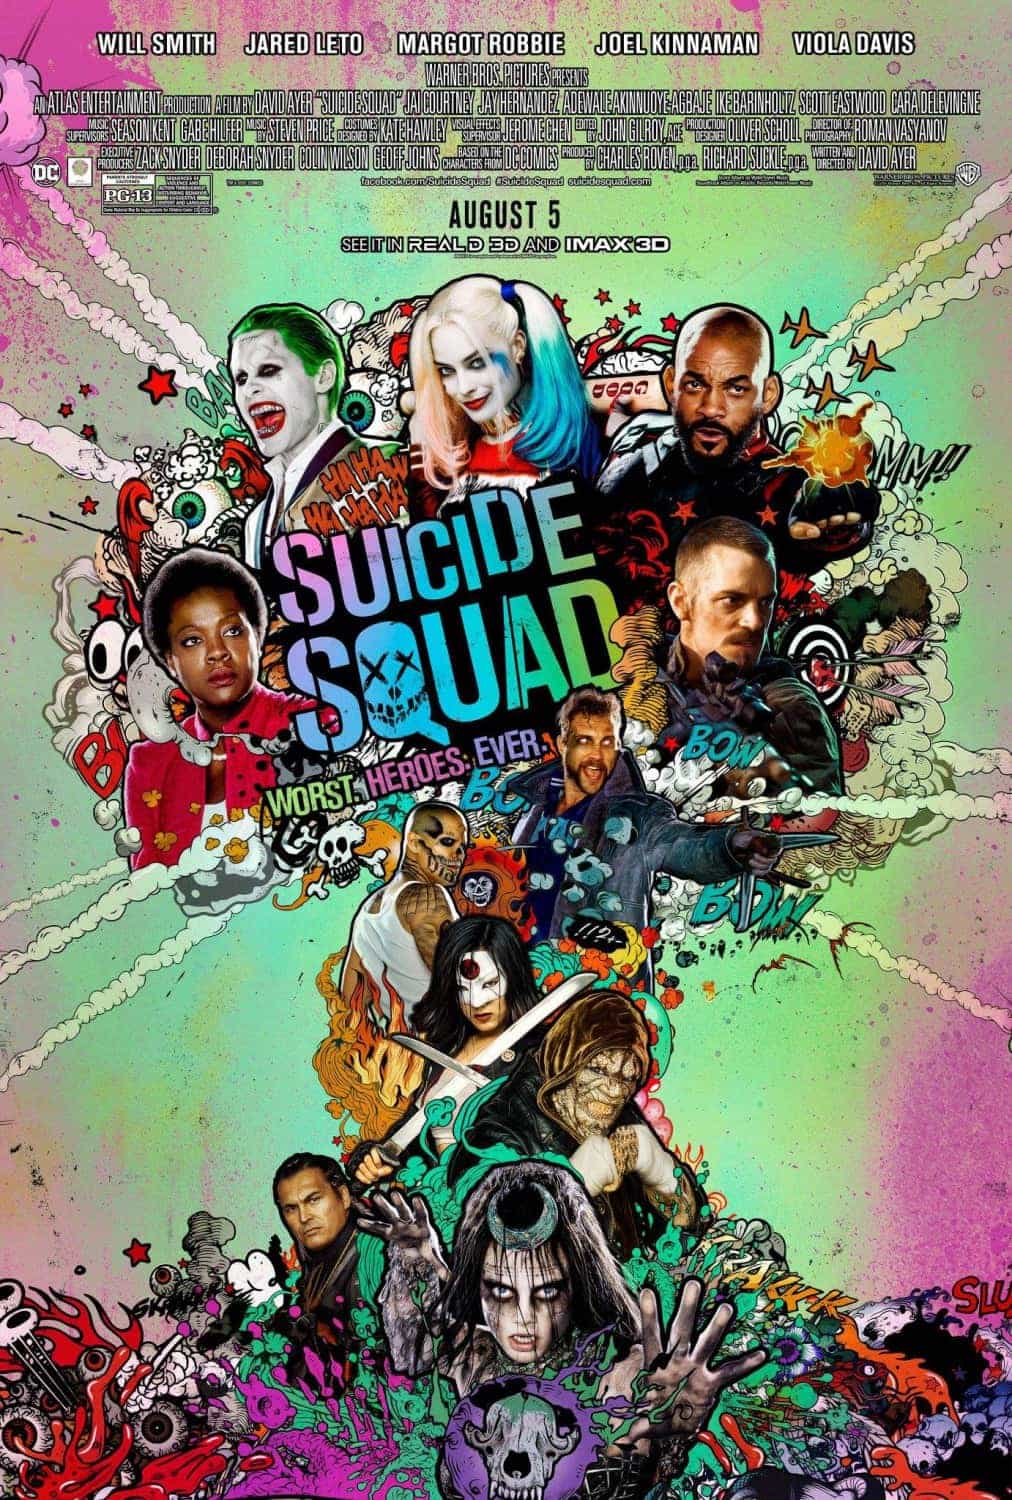 World Box Office Weekending 7 August 2016:  Suicide Squad dominates across the globe